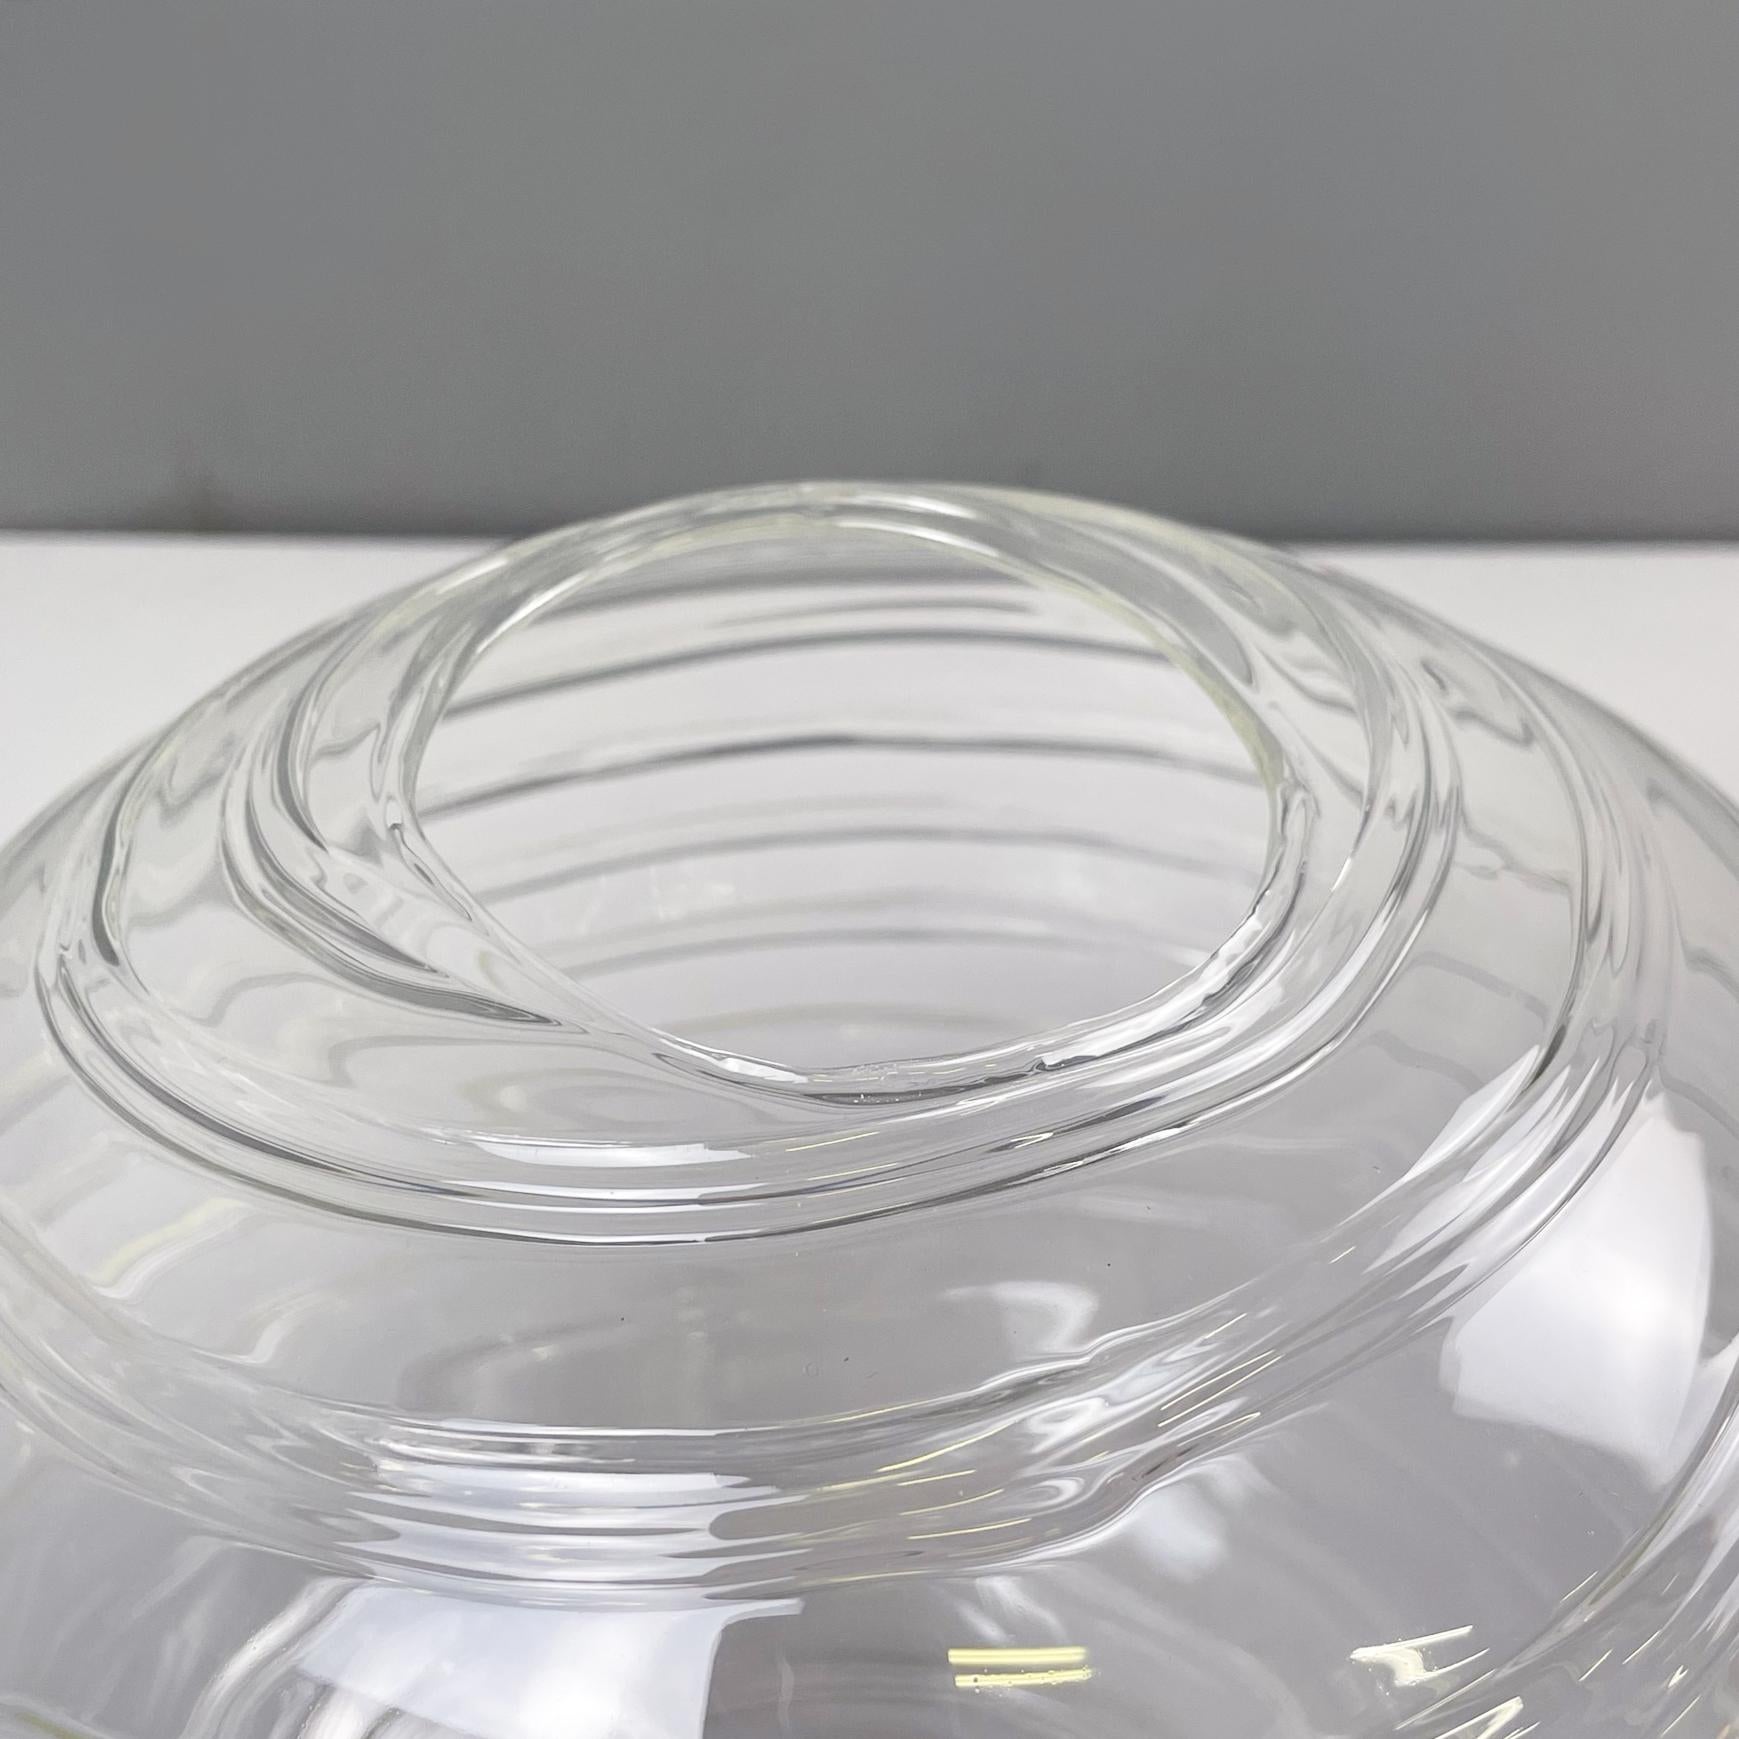 Italian modern Glass vase with round shape and spiral by Roberto Faccioli, 1990s For Sale 1